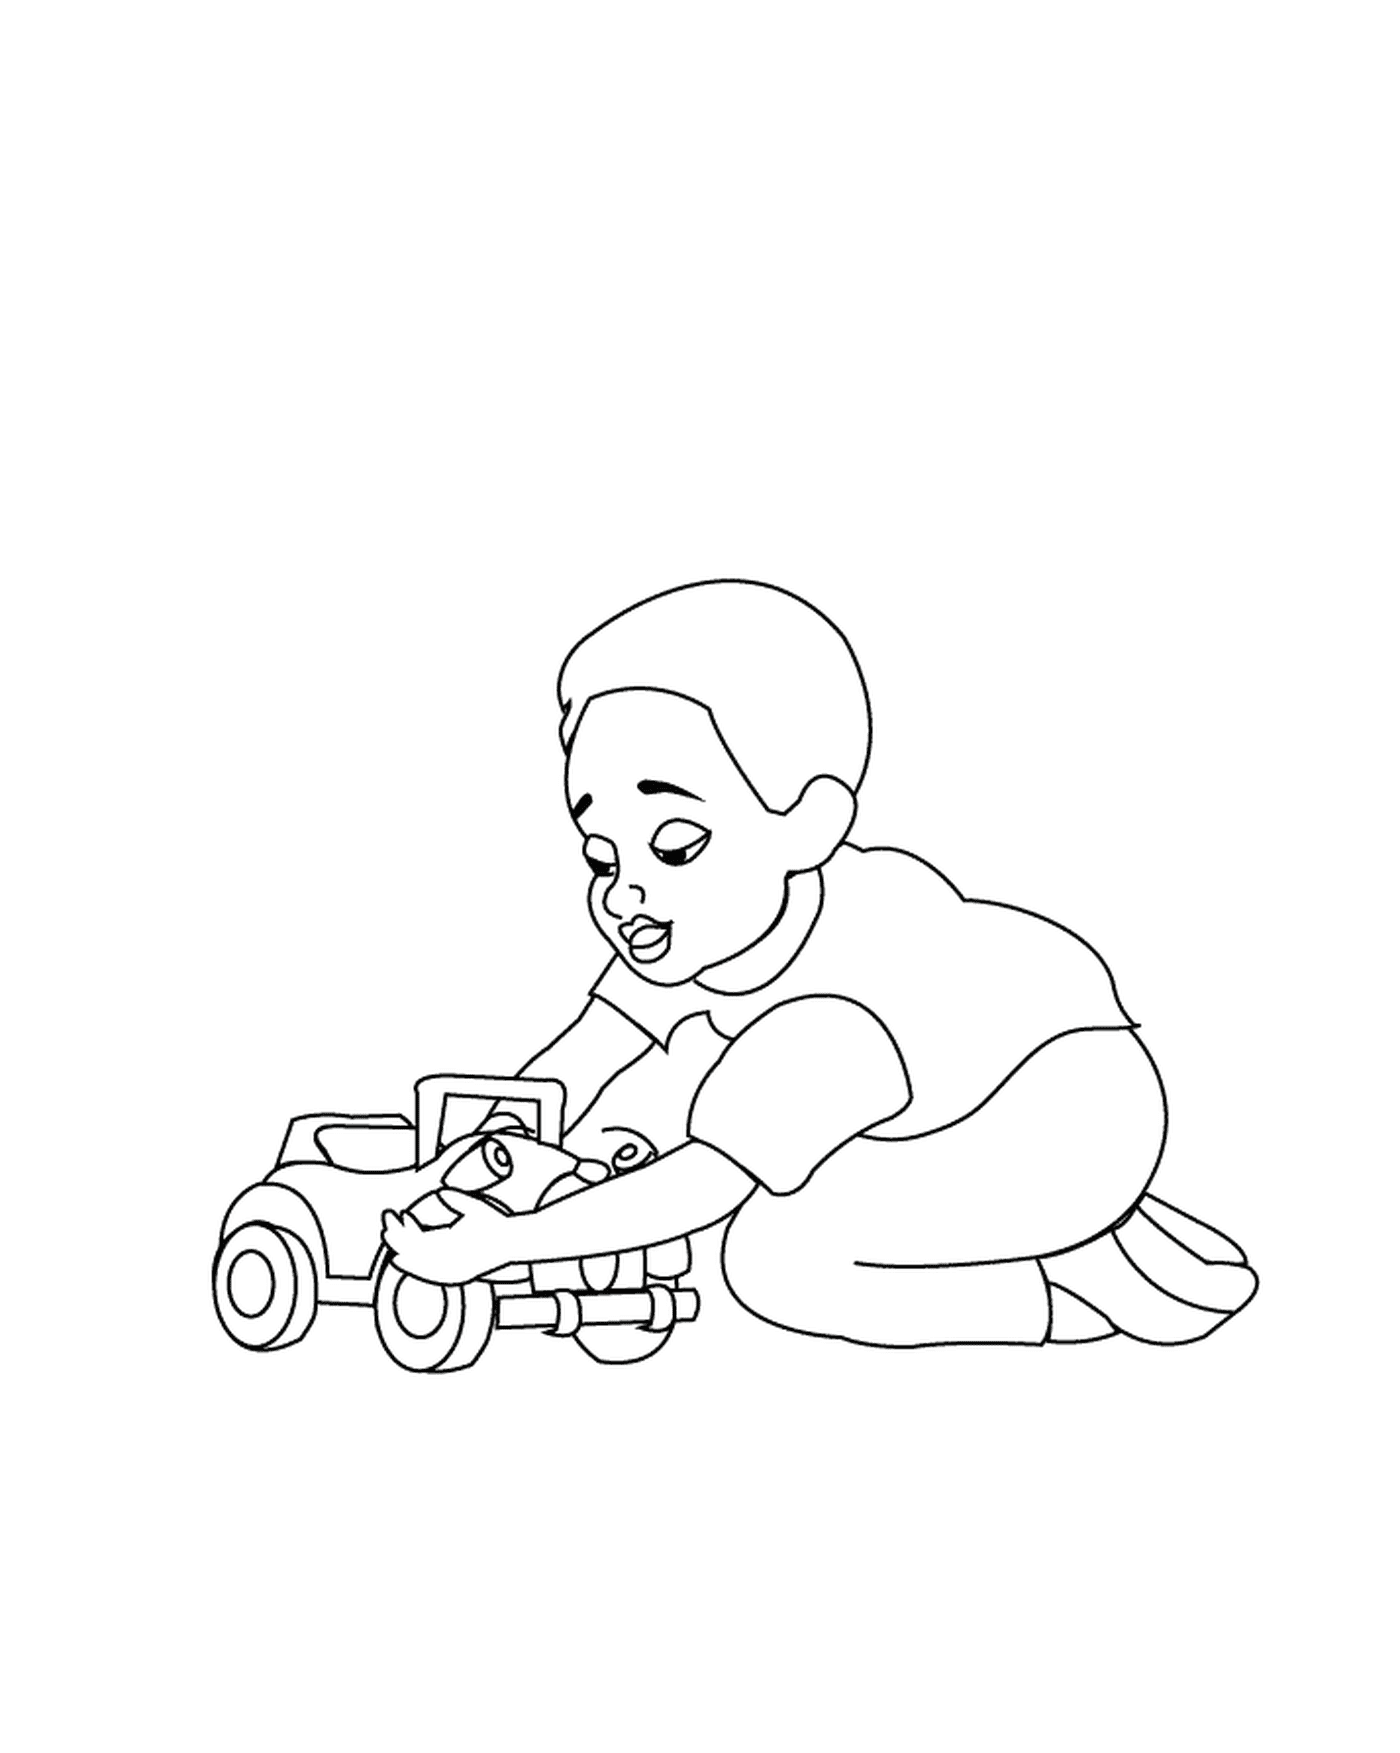  A child plays with a toy car 